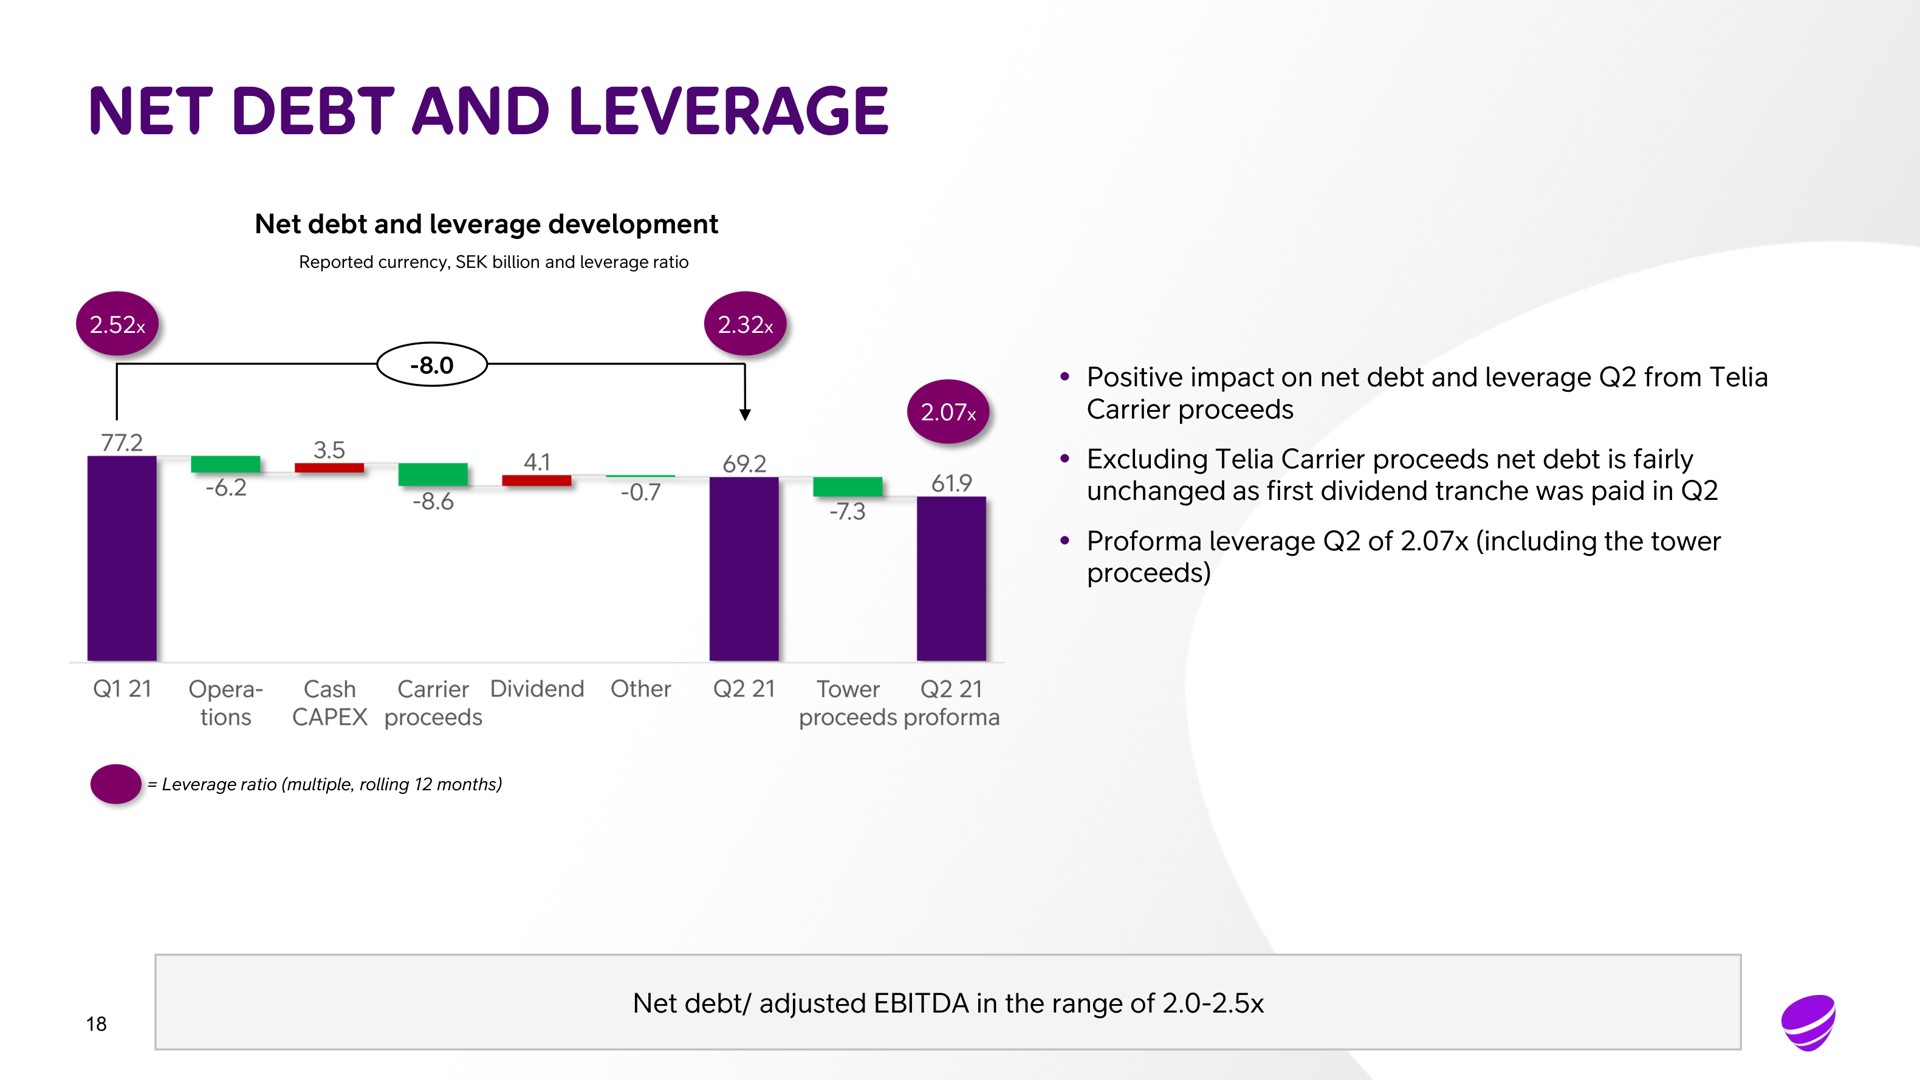 net debt and leverage net debt and leverage development positive impact on net debt and leverage from carrier proceeds excluding carrier proceeds net debt is fairly unchanged as first dividend was paid in leverage of including the tower proceeds net debt adjusted in the range of | Telia Company